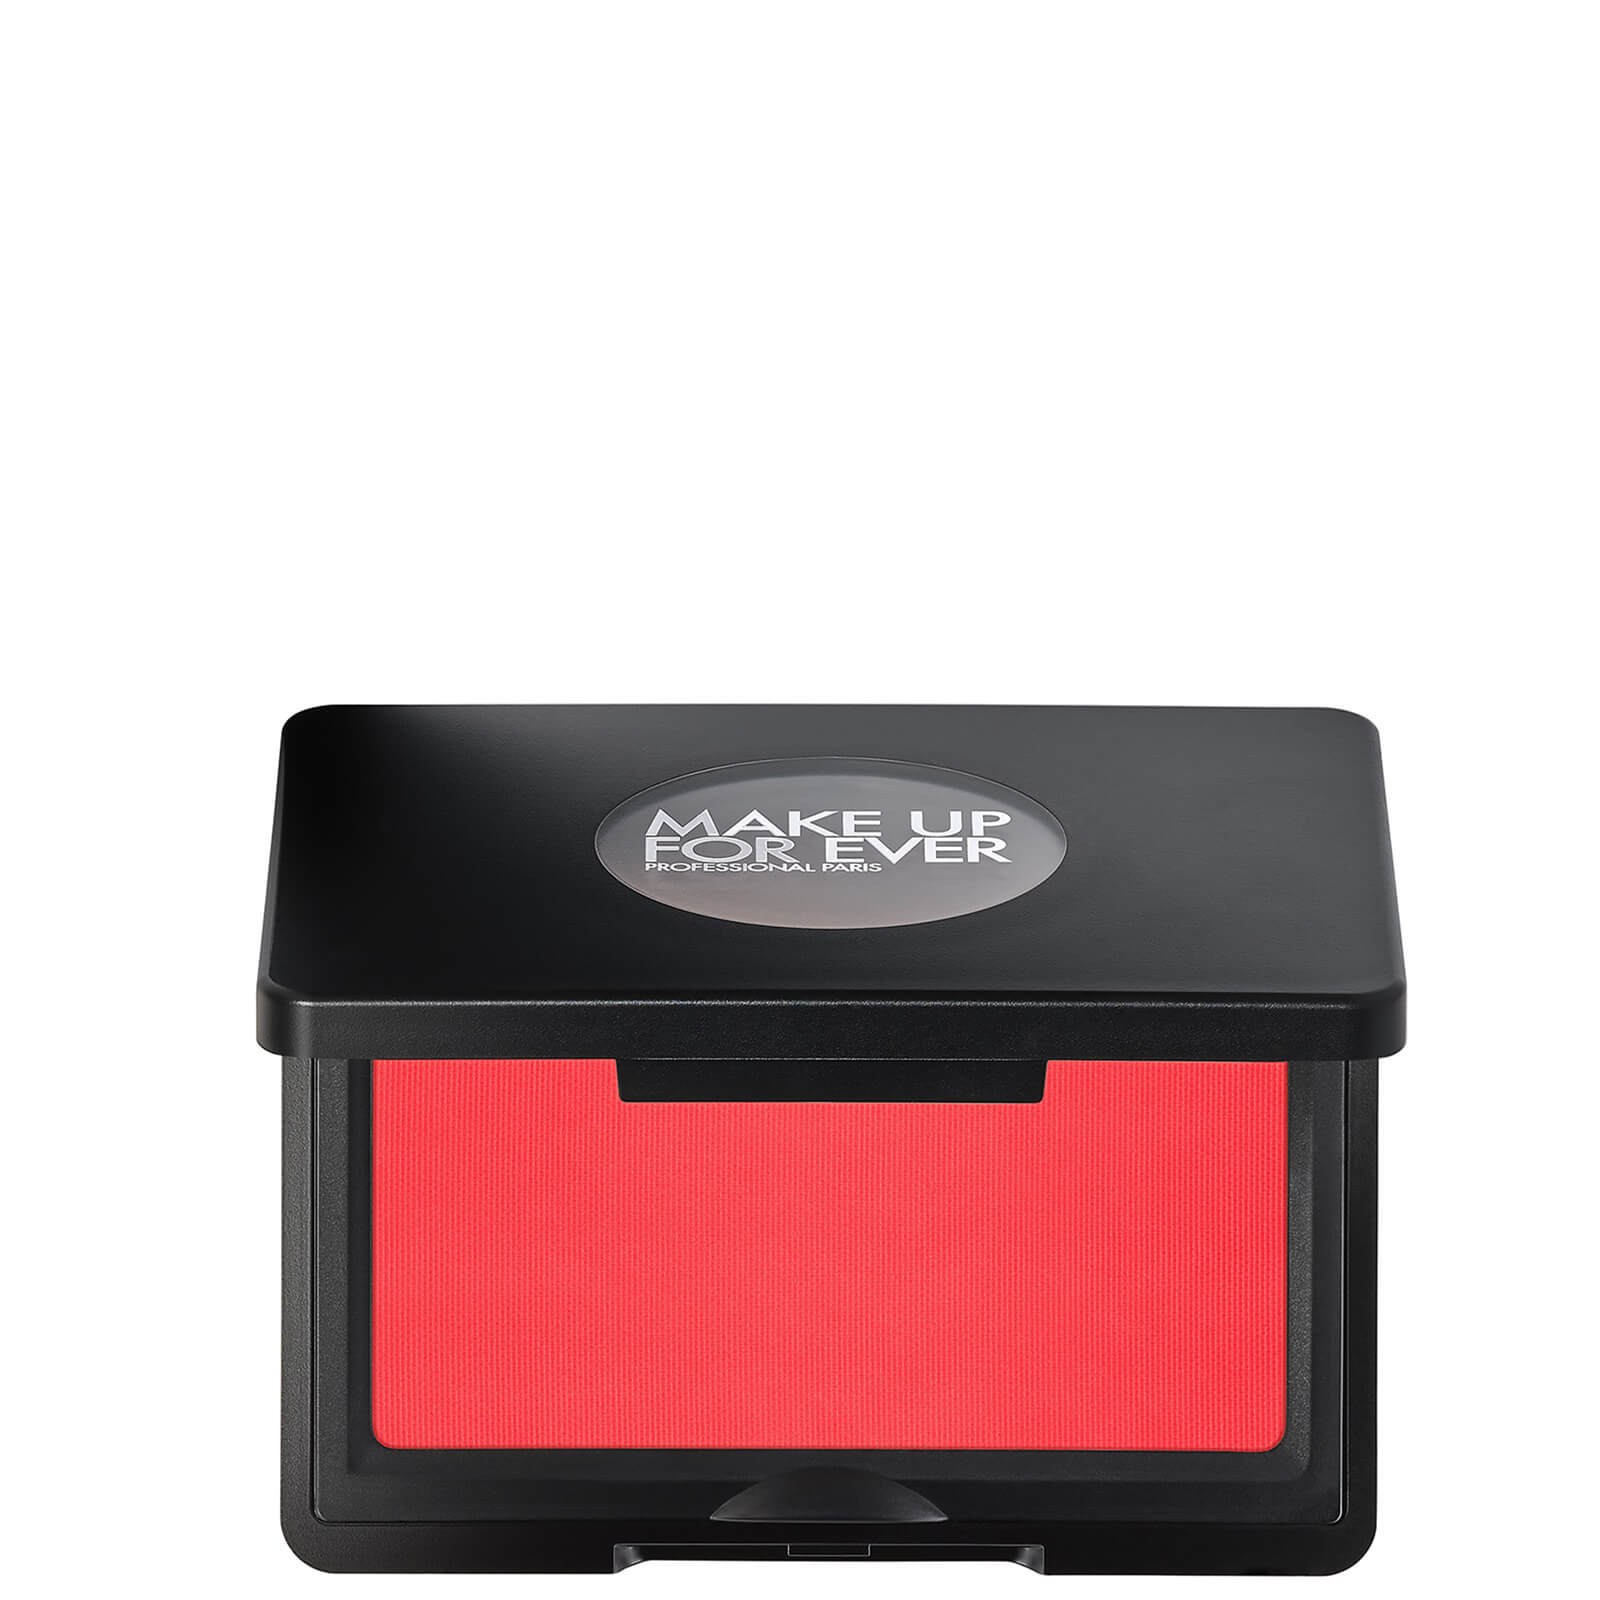 MAKE UP FOR EVER Artist Face Powders Blush 4g (Various Shades) - B350 - Flashing Fire